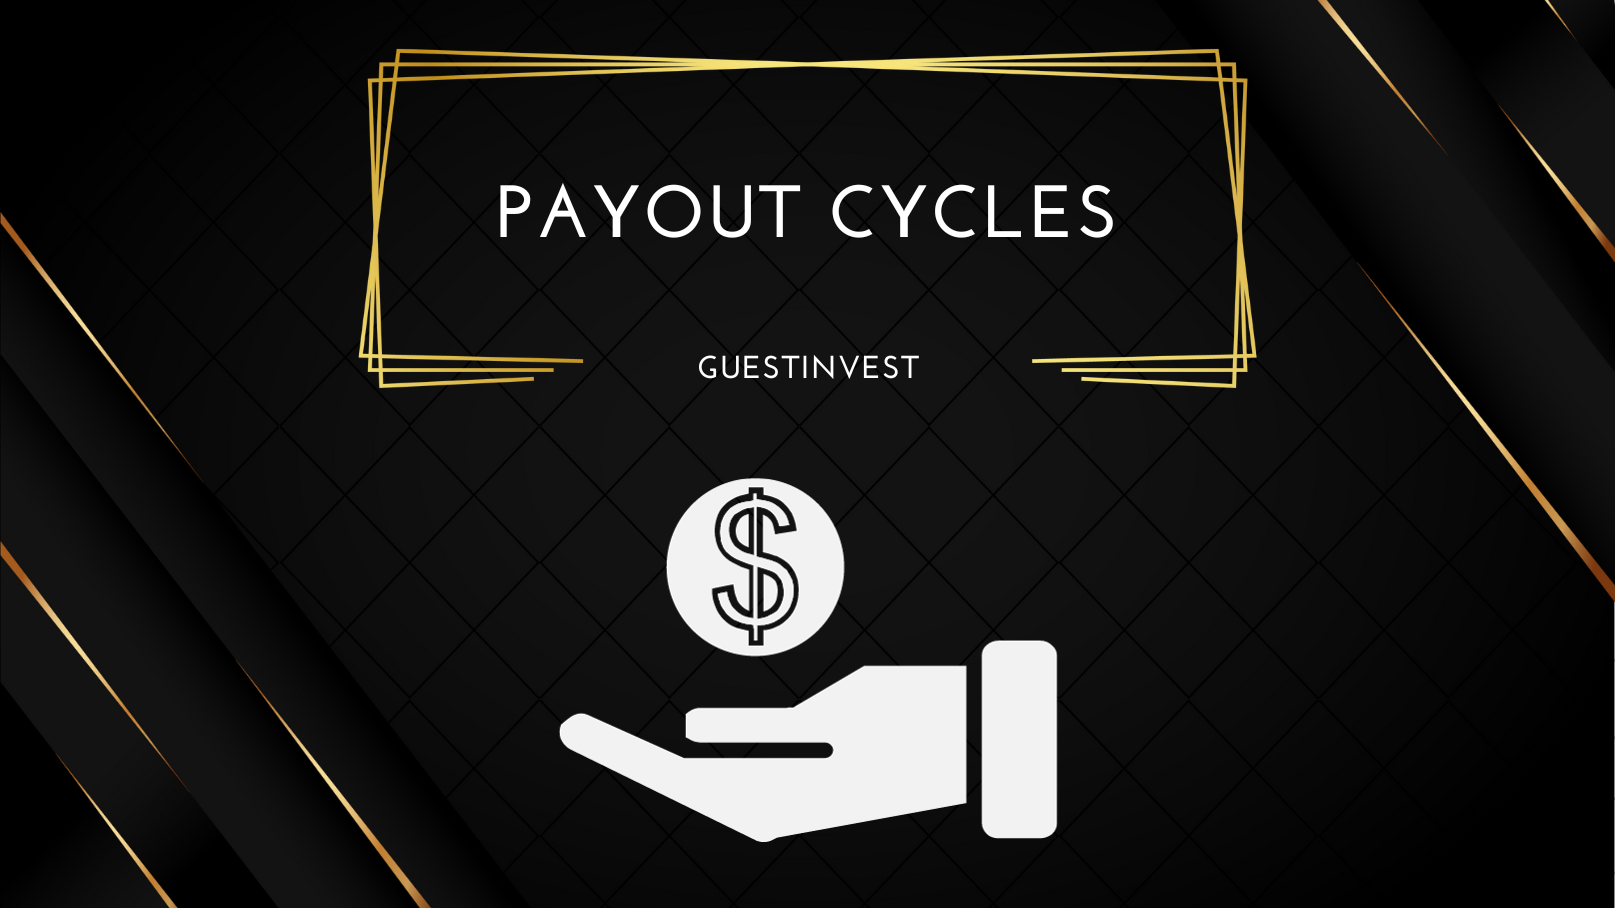 Forex Proprietary trading firms provide profitable traders with payouts. Let’s see each Forex proprietary trading firm’s payout cycle.